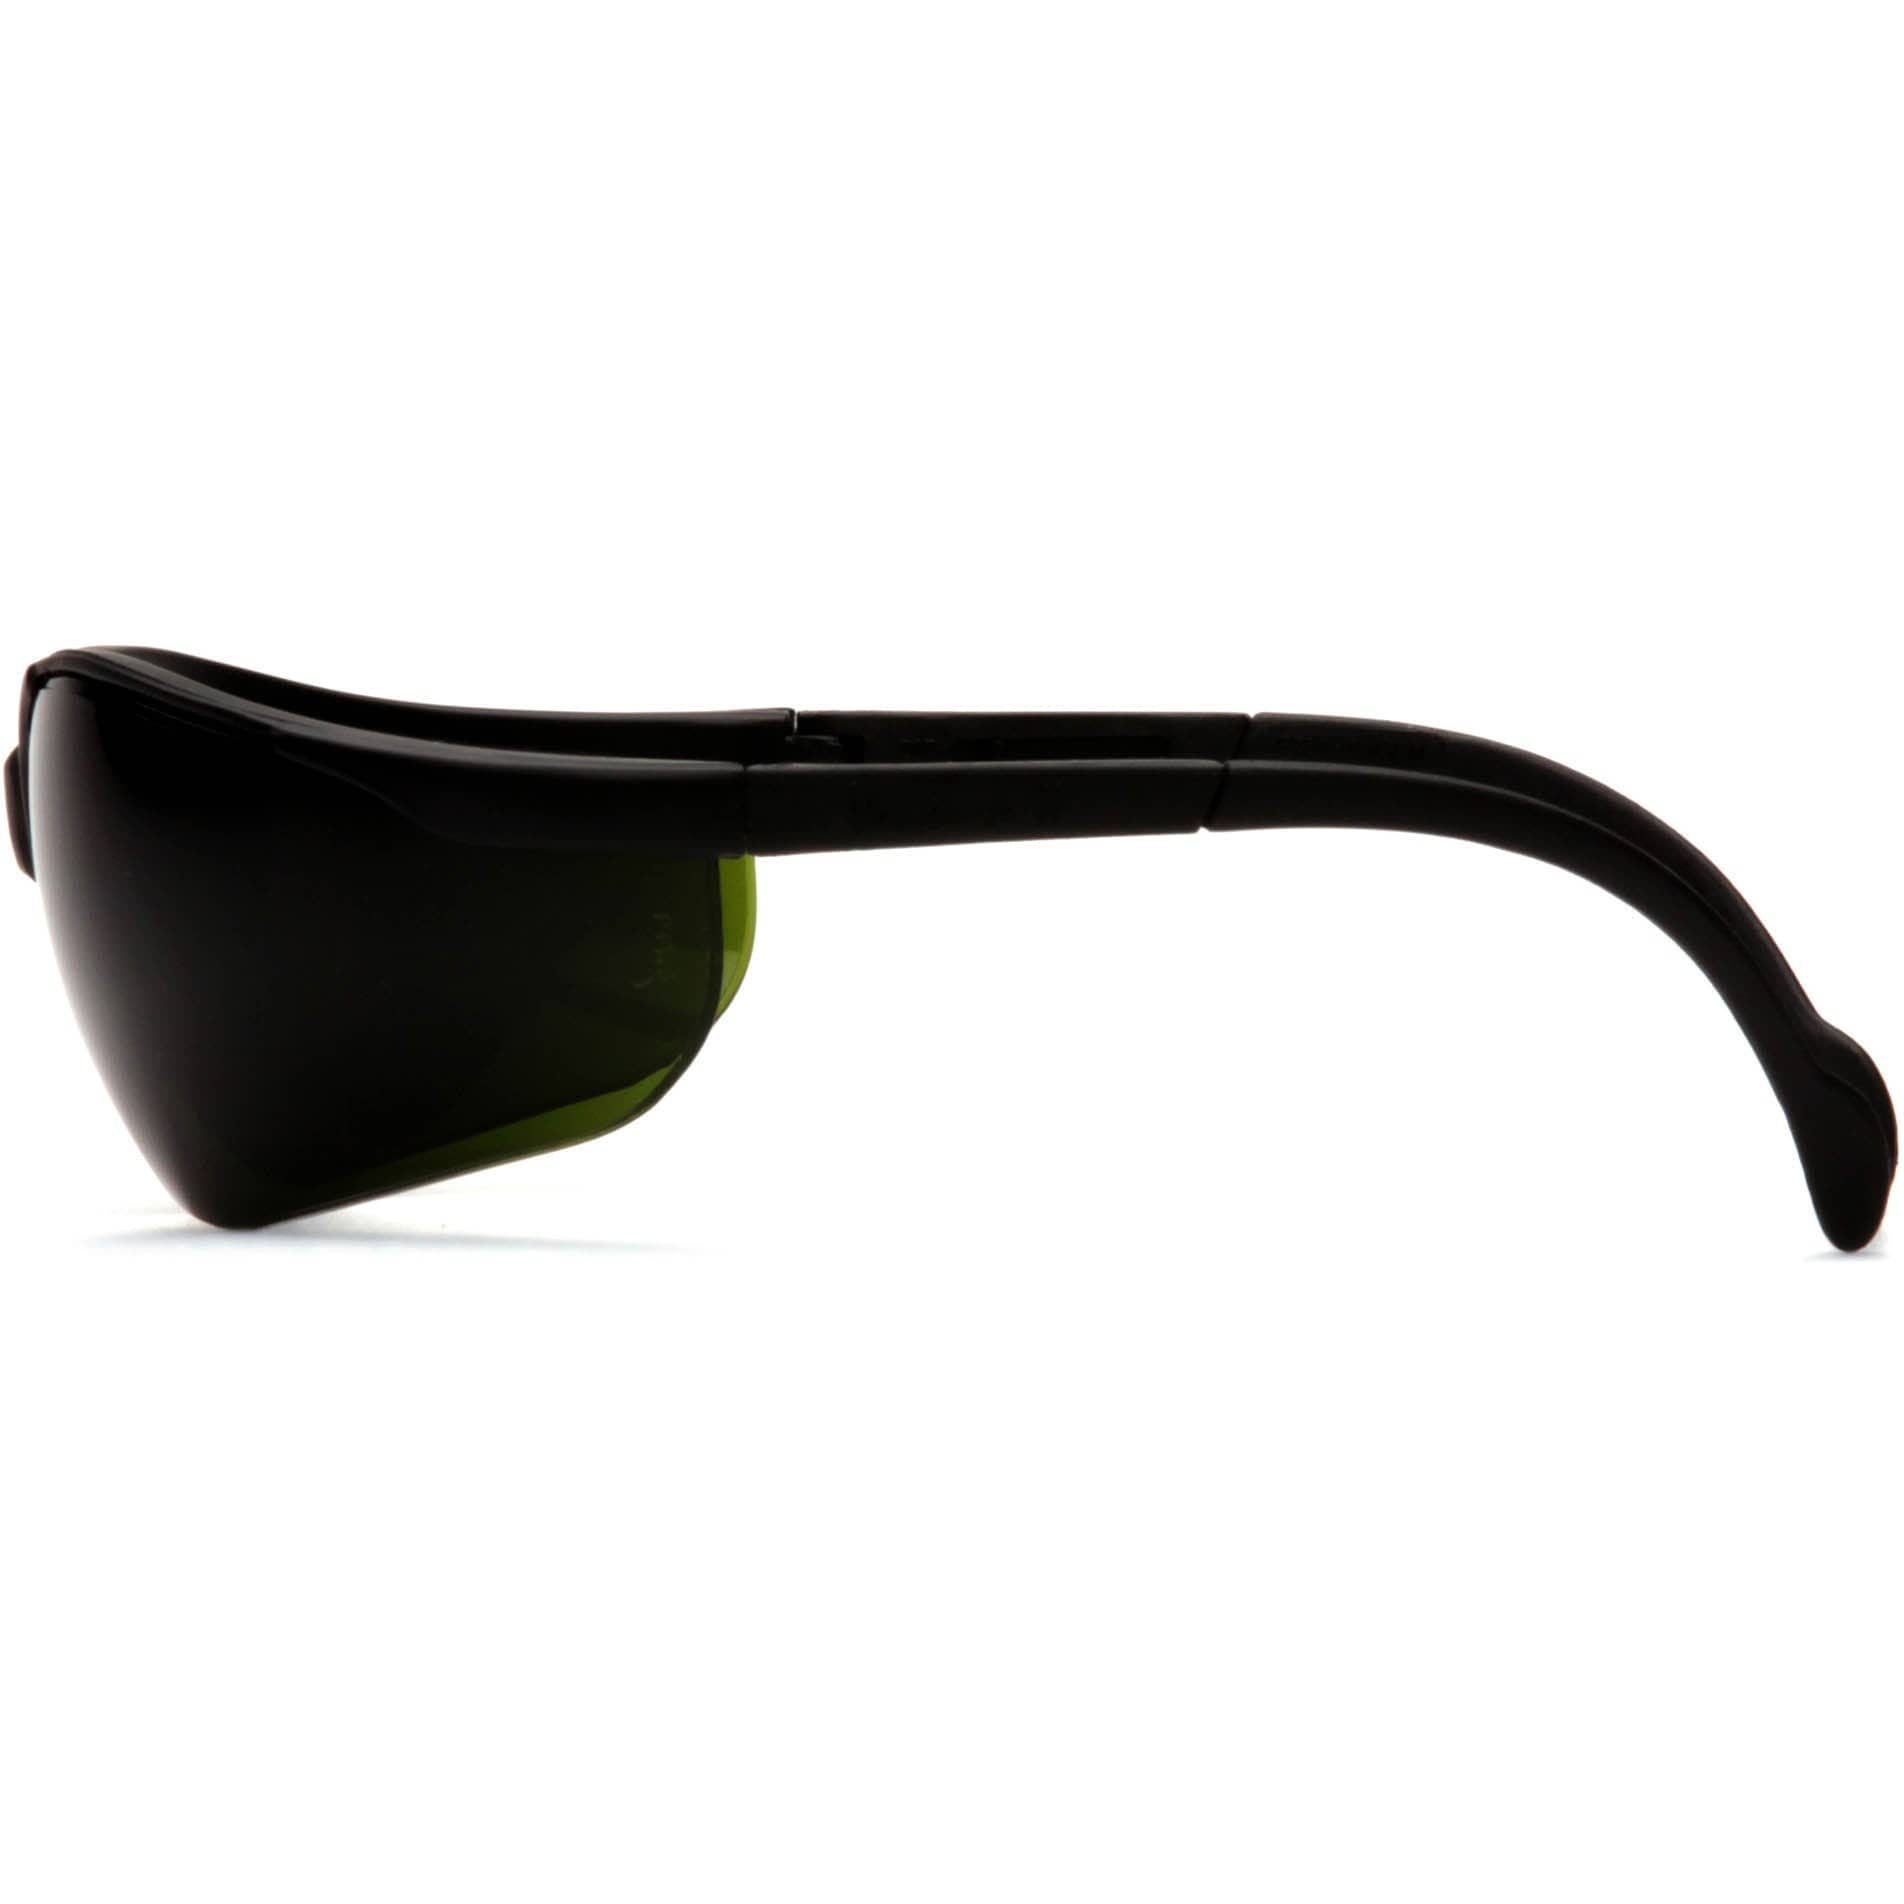 Pyramex Venture 2 Safety Glasses with Black Frame and Shade 5.0 Lens Side View